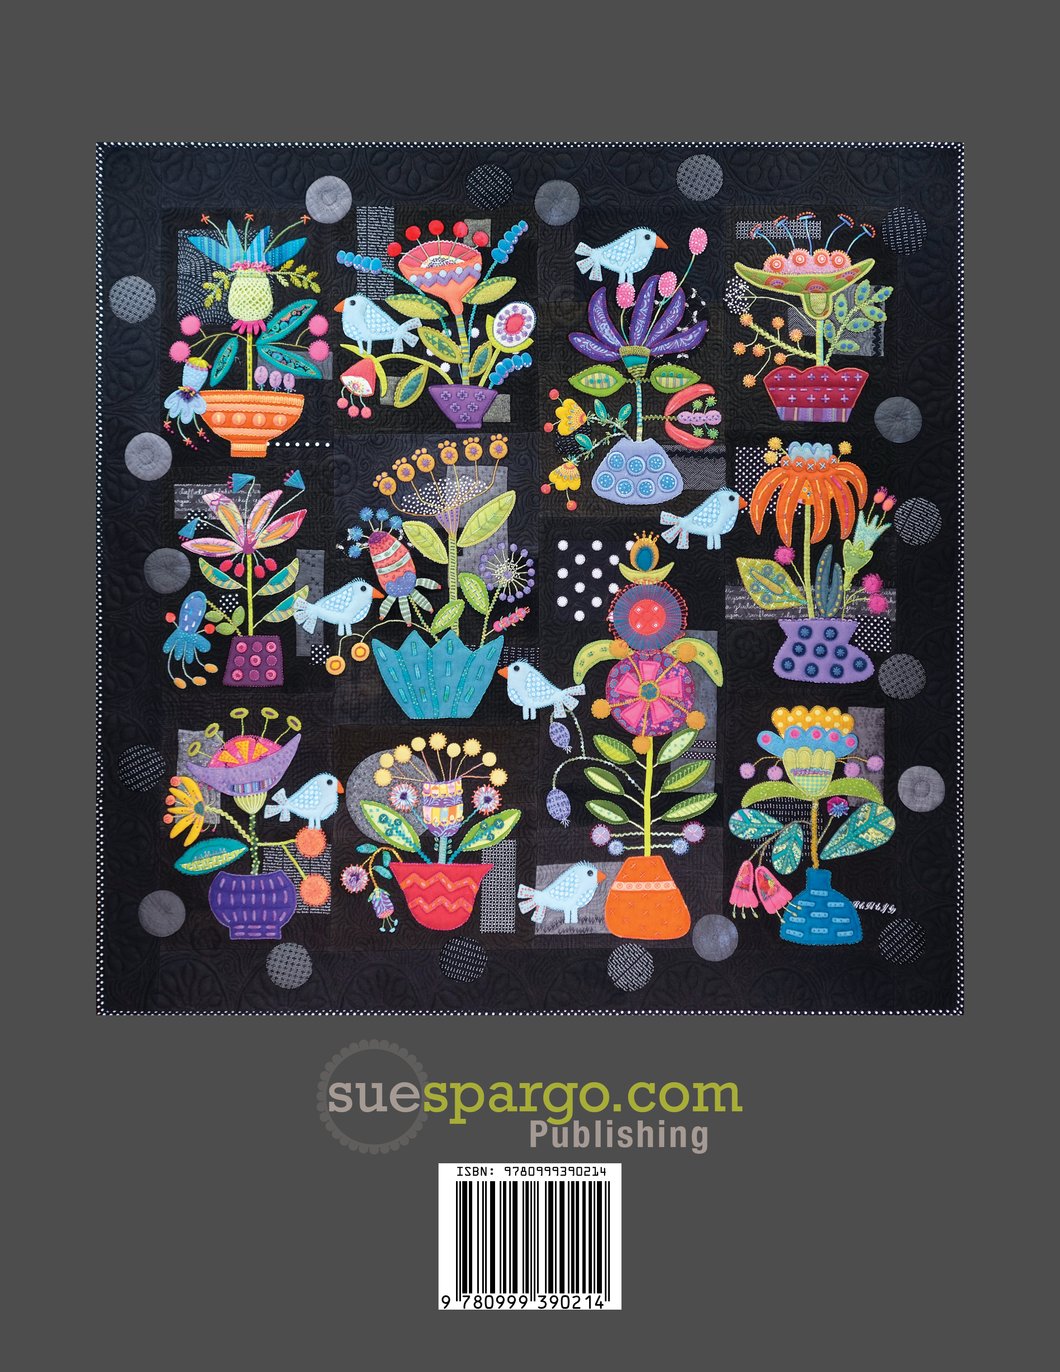 Fresh Cut - Applique, Embroidery, and Quilt Pattern Book by Sue Spargo of Folk Art Quilts